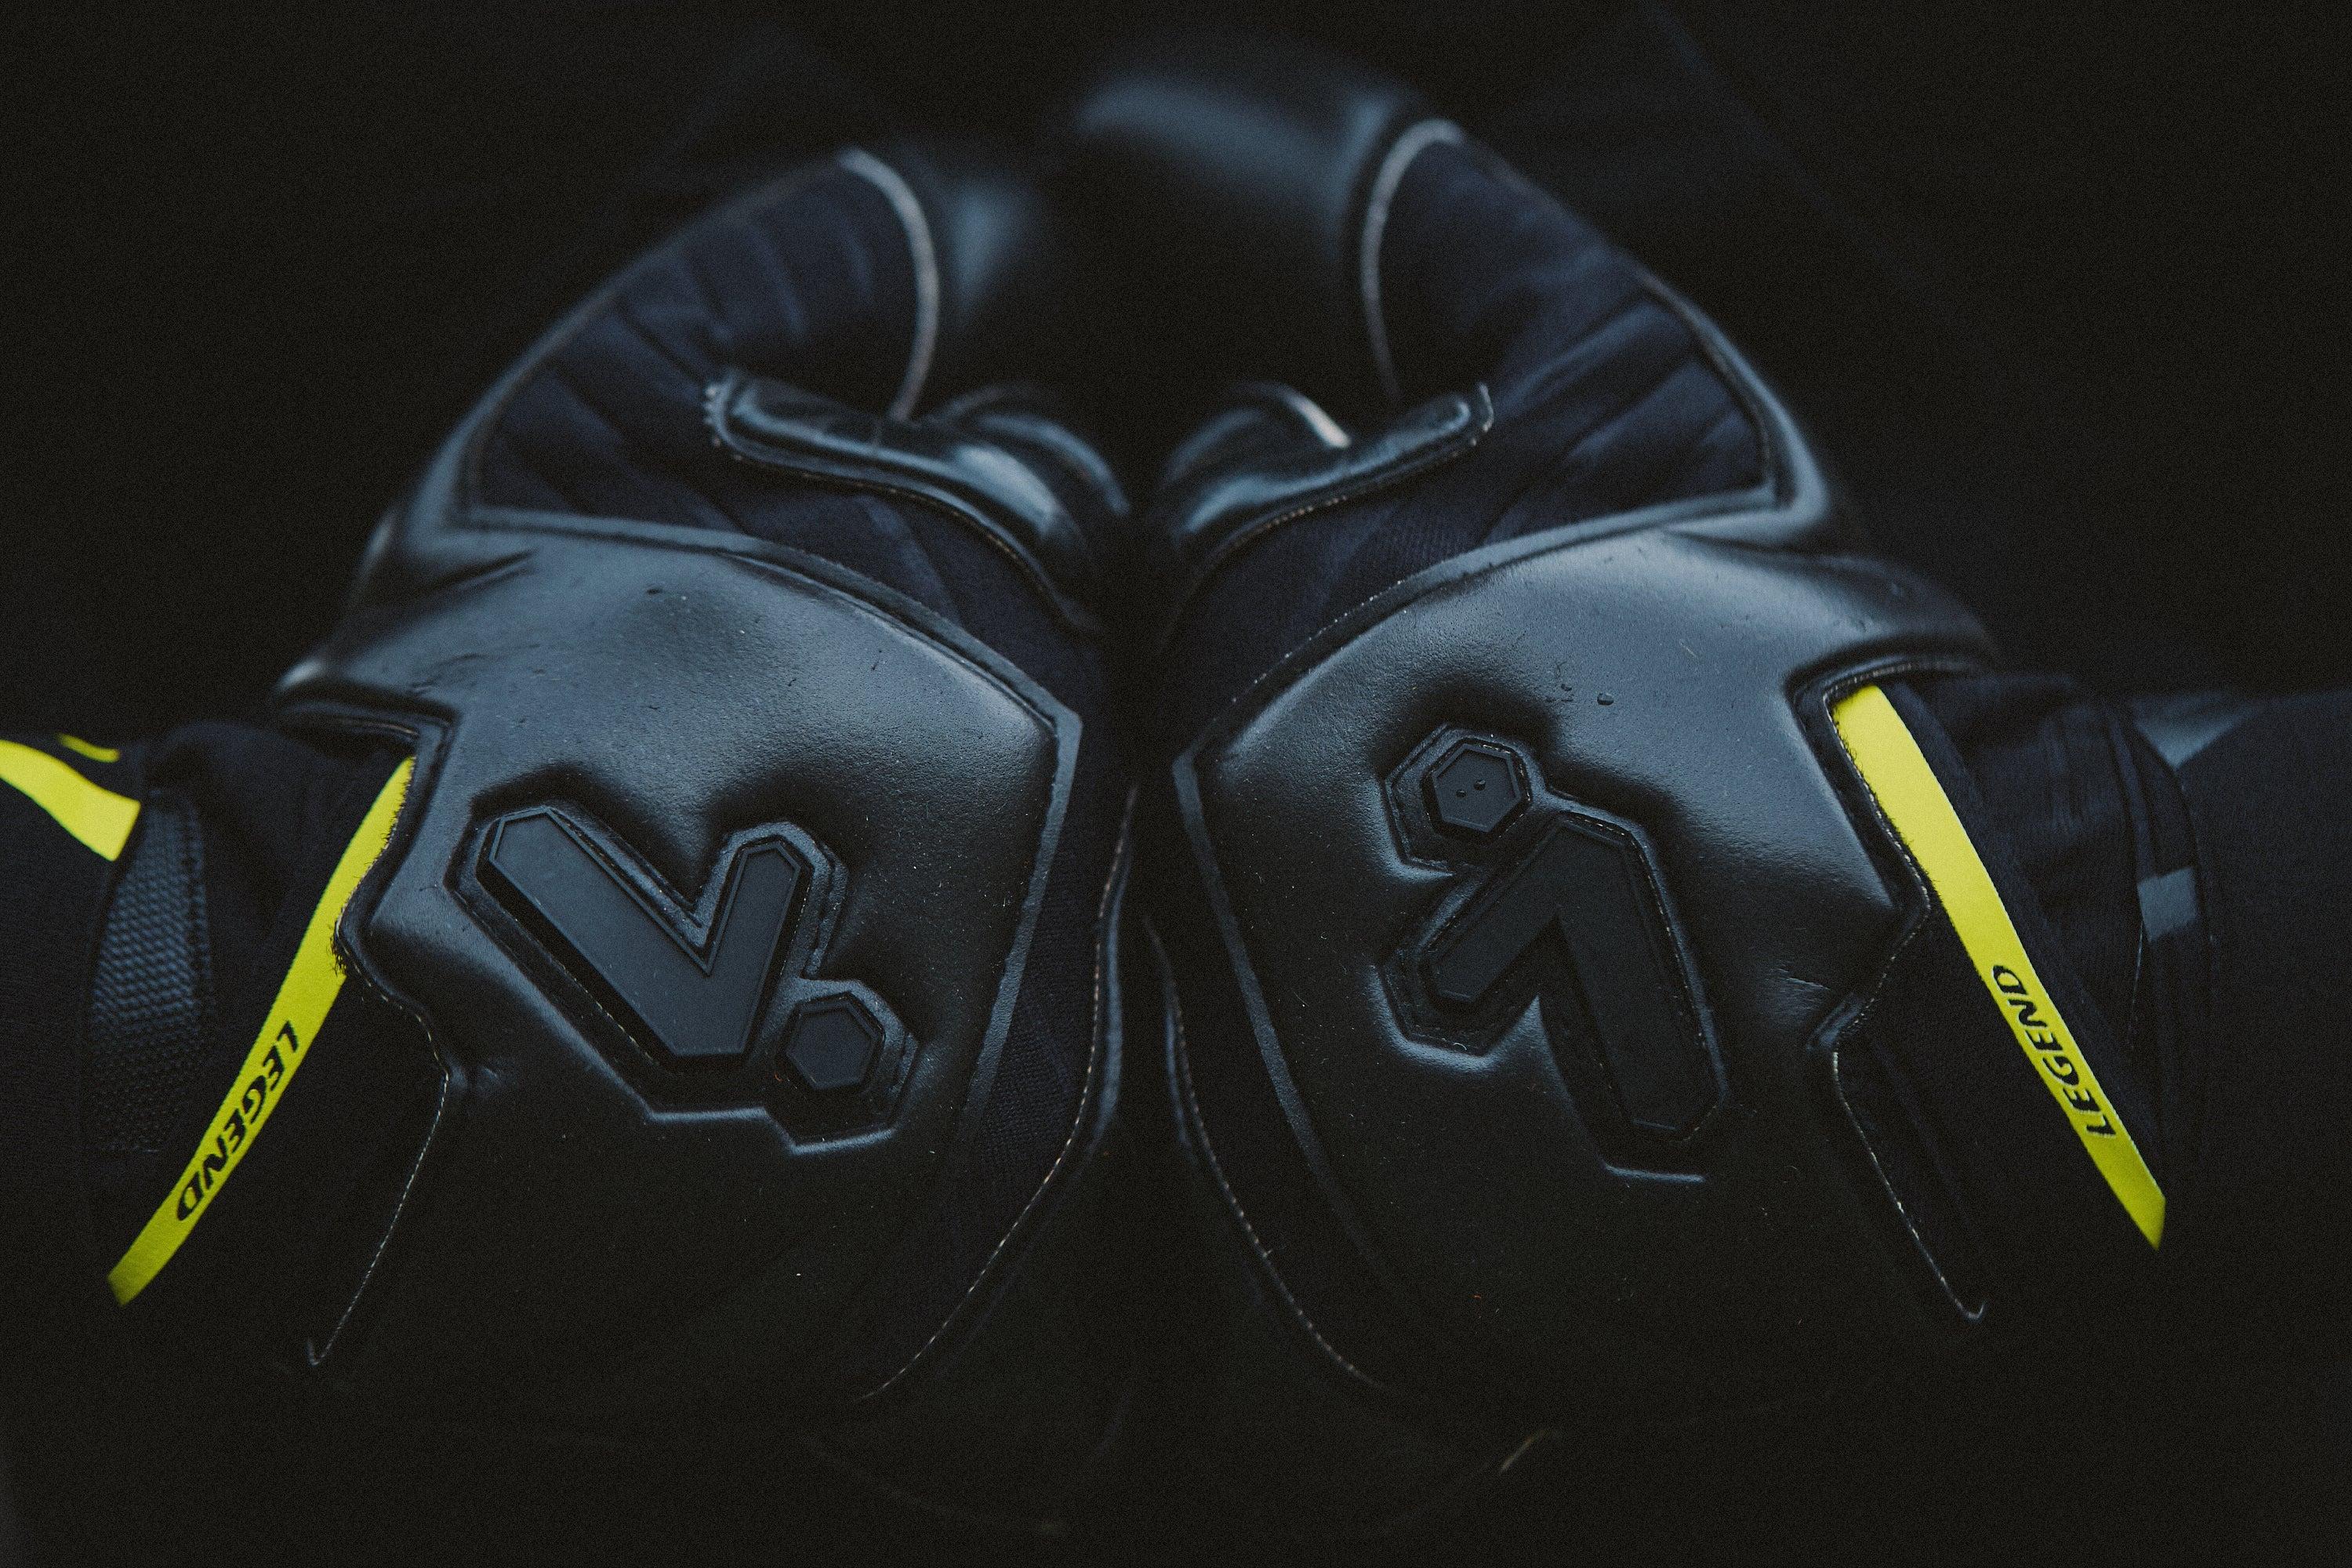 Despite some inevitable latex degradation, goalkeeper gloves will continue to function.